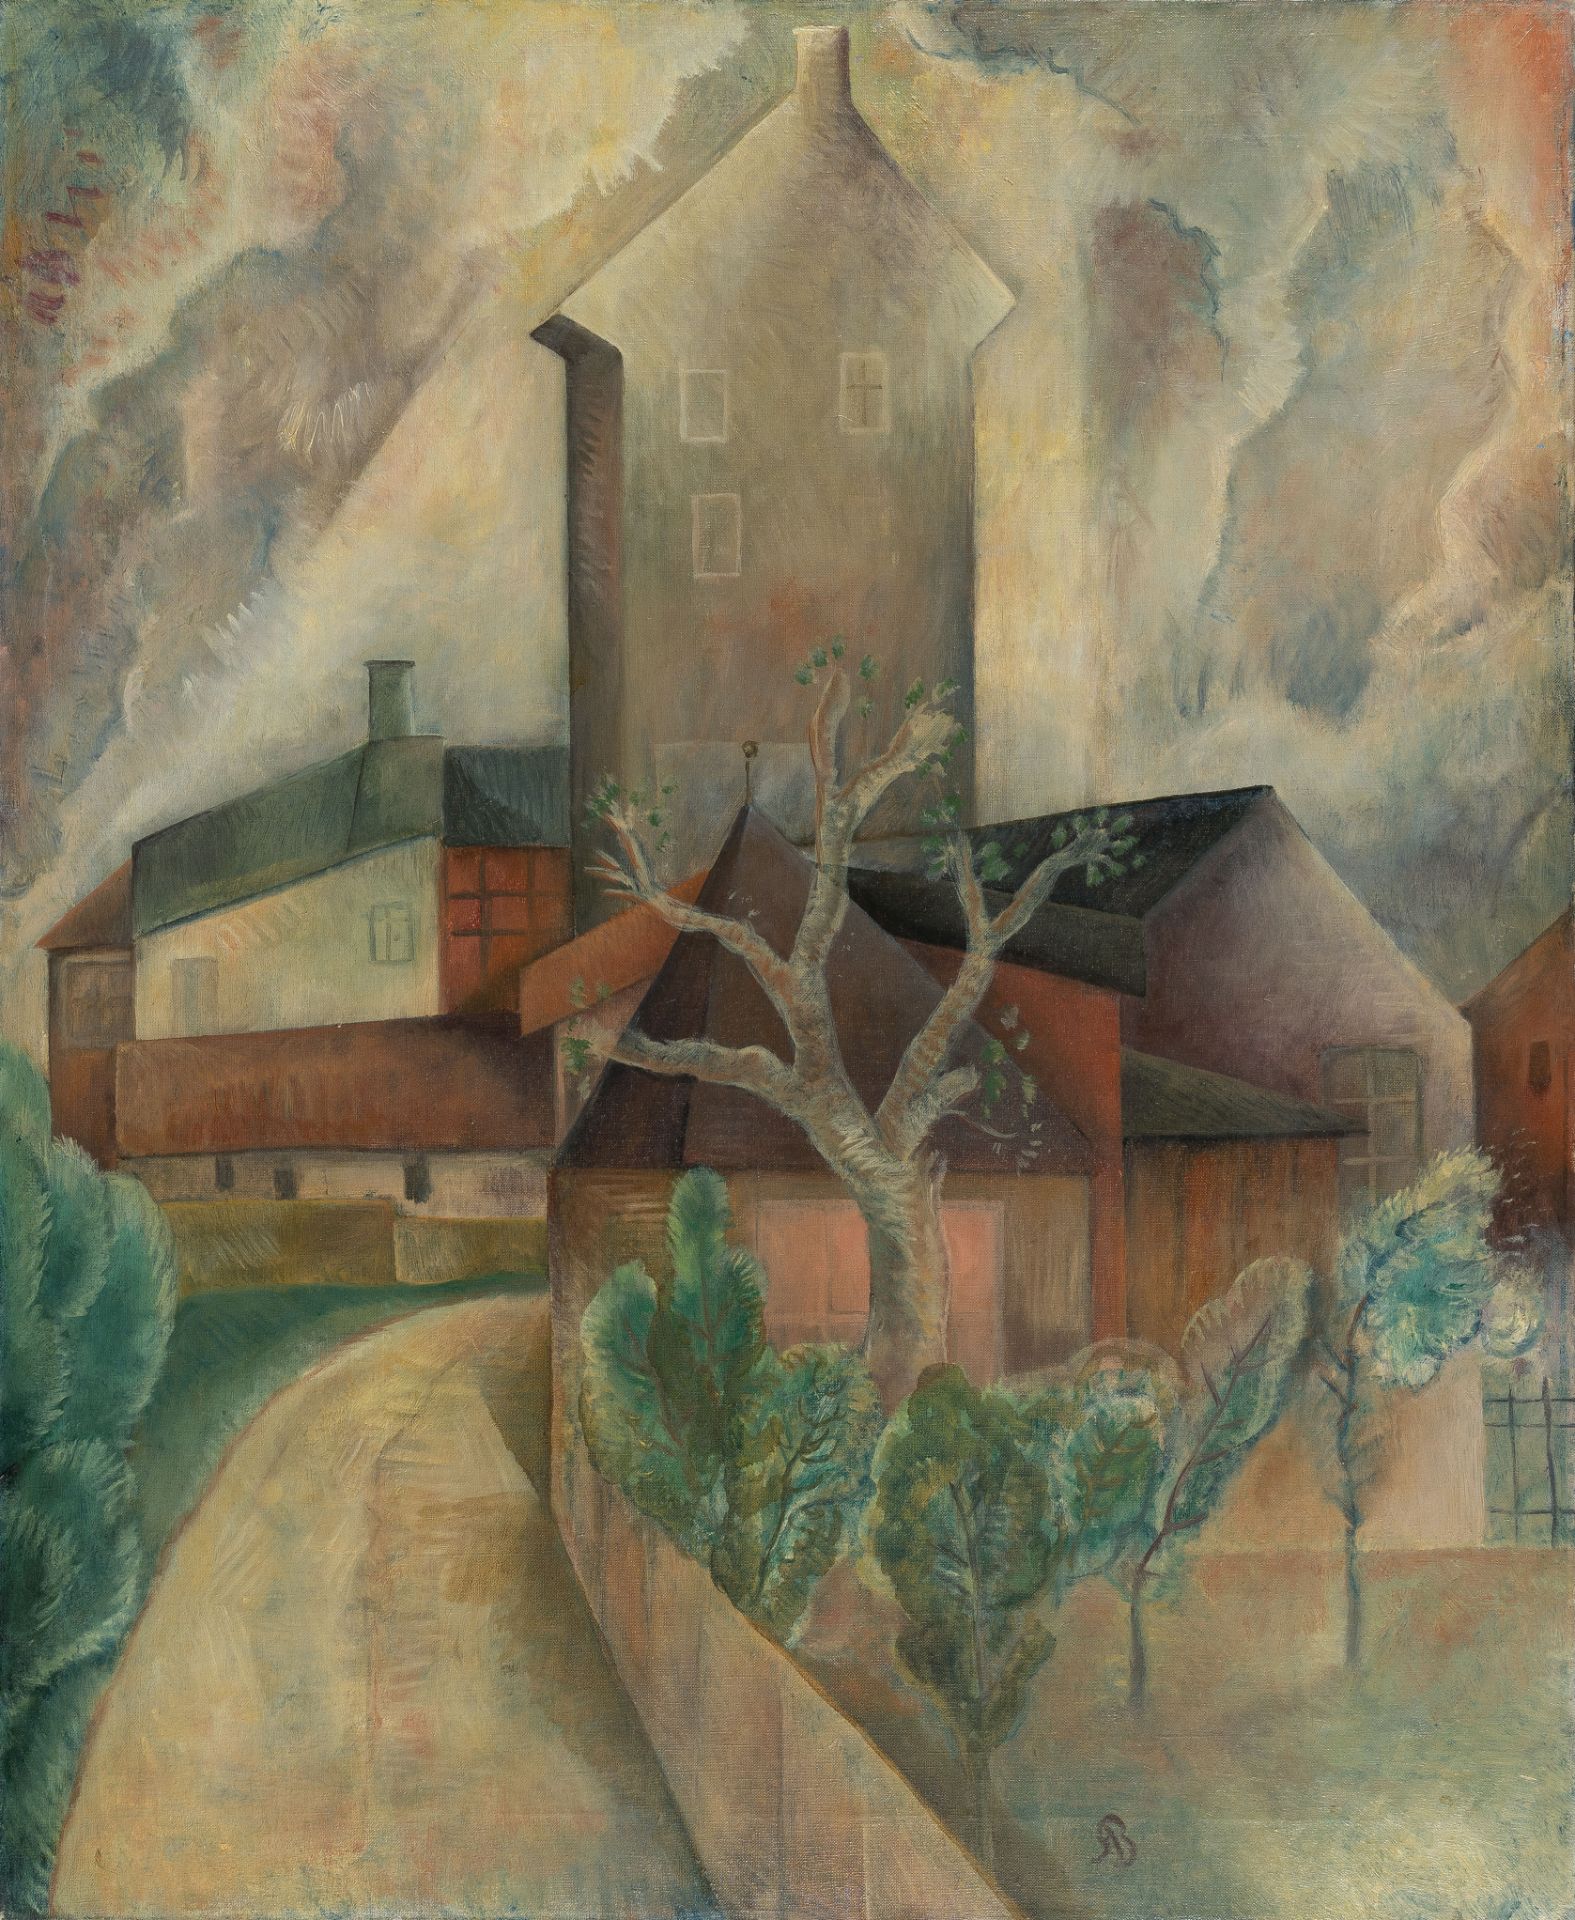 Albert Bloch, Clouds and houses.Oil on canvas. (1917/1925). Ca. 76 x 72.5 cm. With conjoined